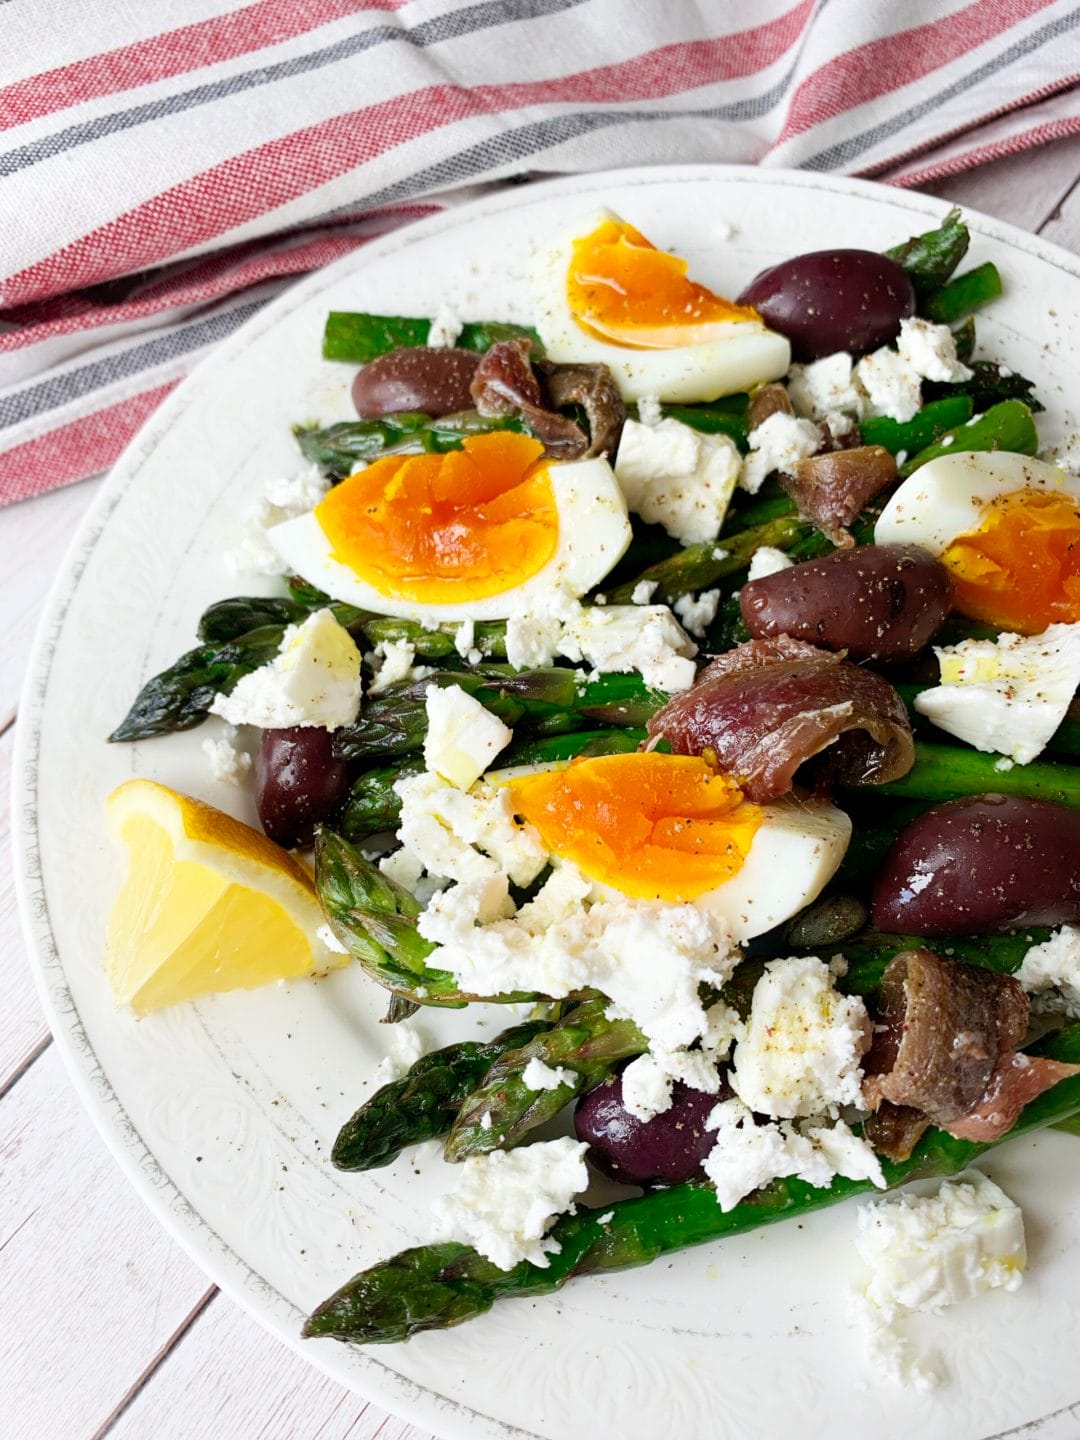 Picture of asparagus in salad with anchovies in Mediterranean style